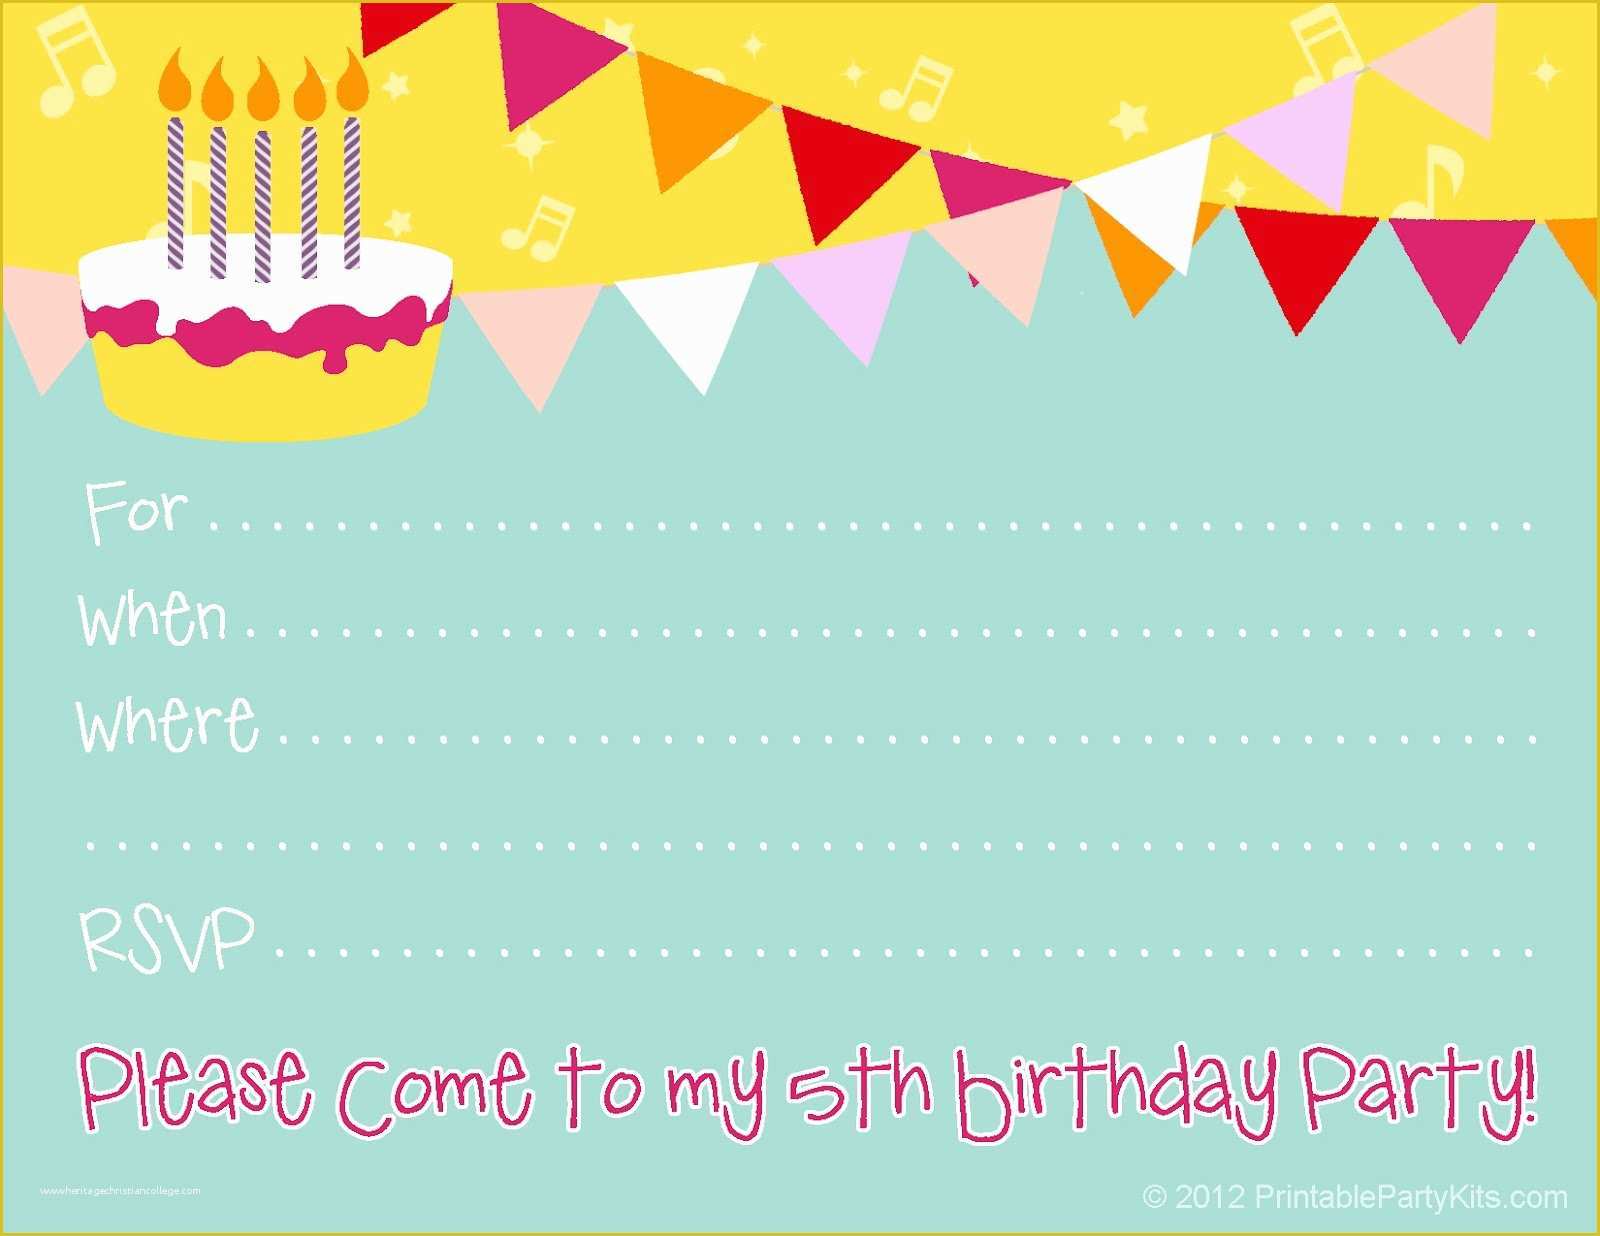 Free Printable Birthday Invitation Cards Templates Of Free Birthday Party Invitations for Girl – Free Printable